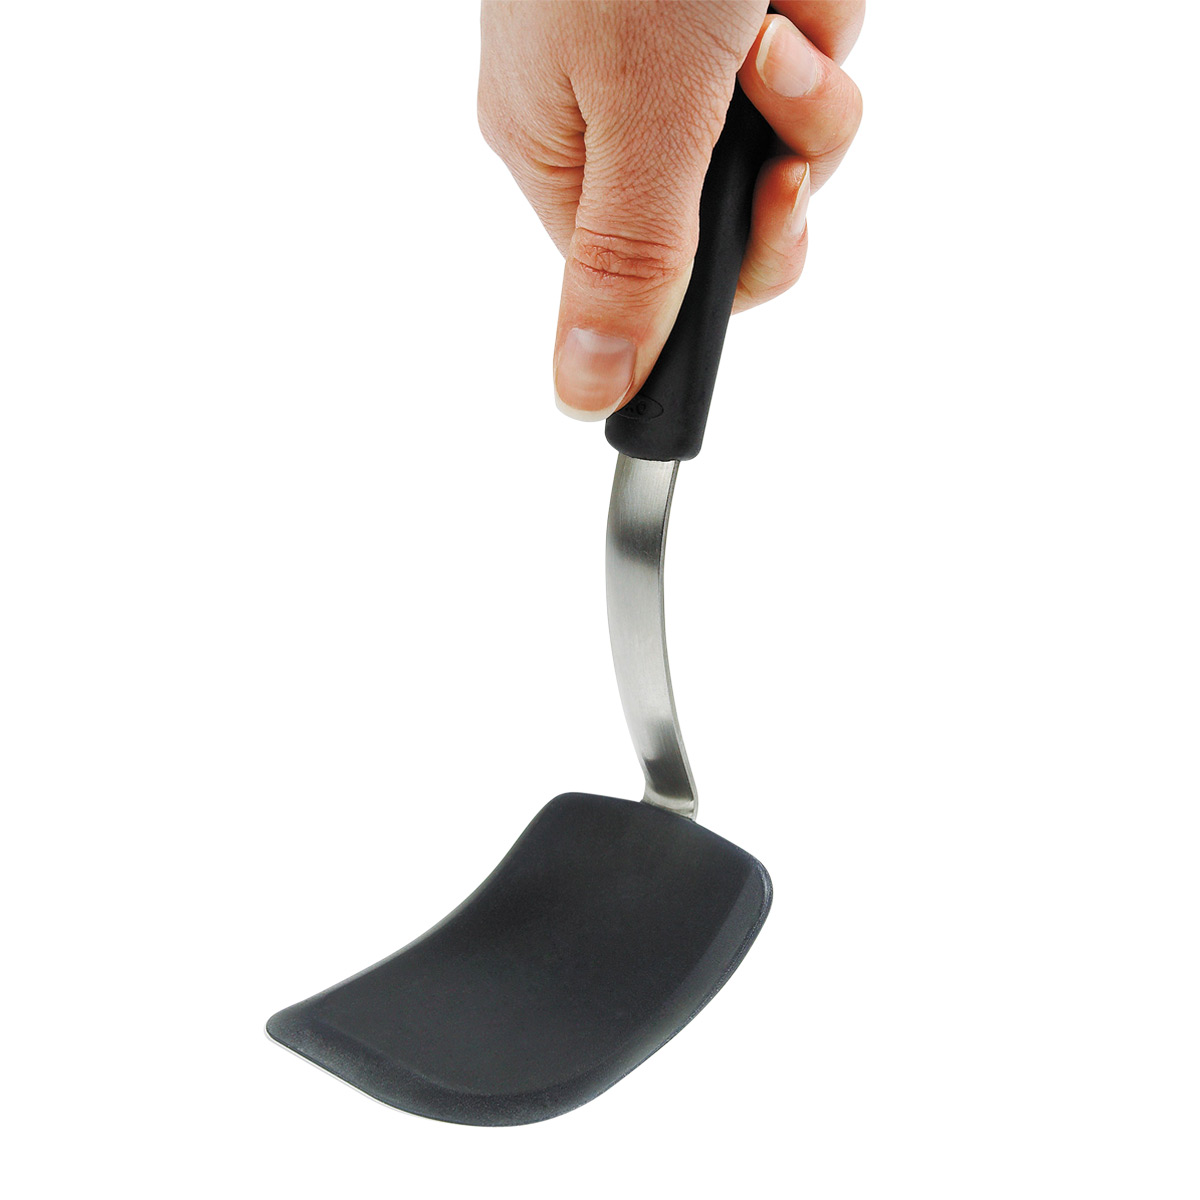 https://www.containerstore.com/catalogimages/347508/10076045-OXO-Cookie-Spatula-VEN3.jpg